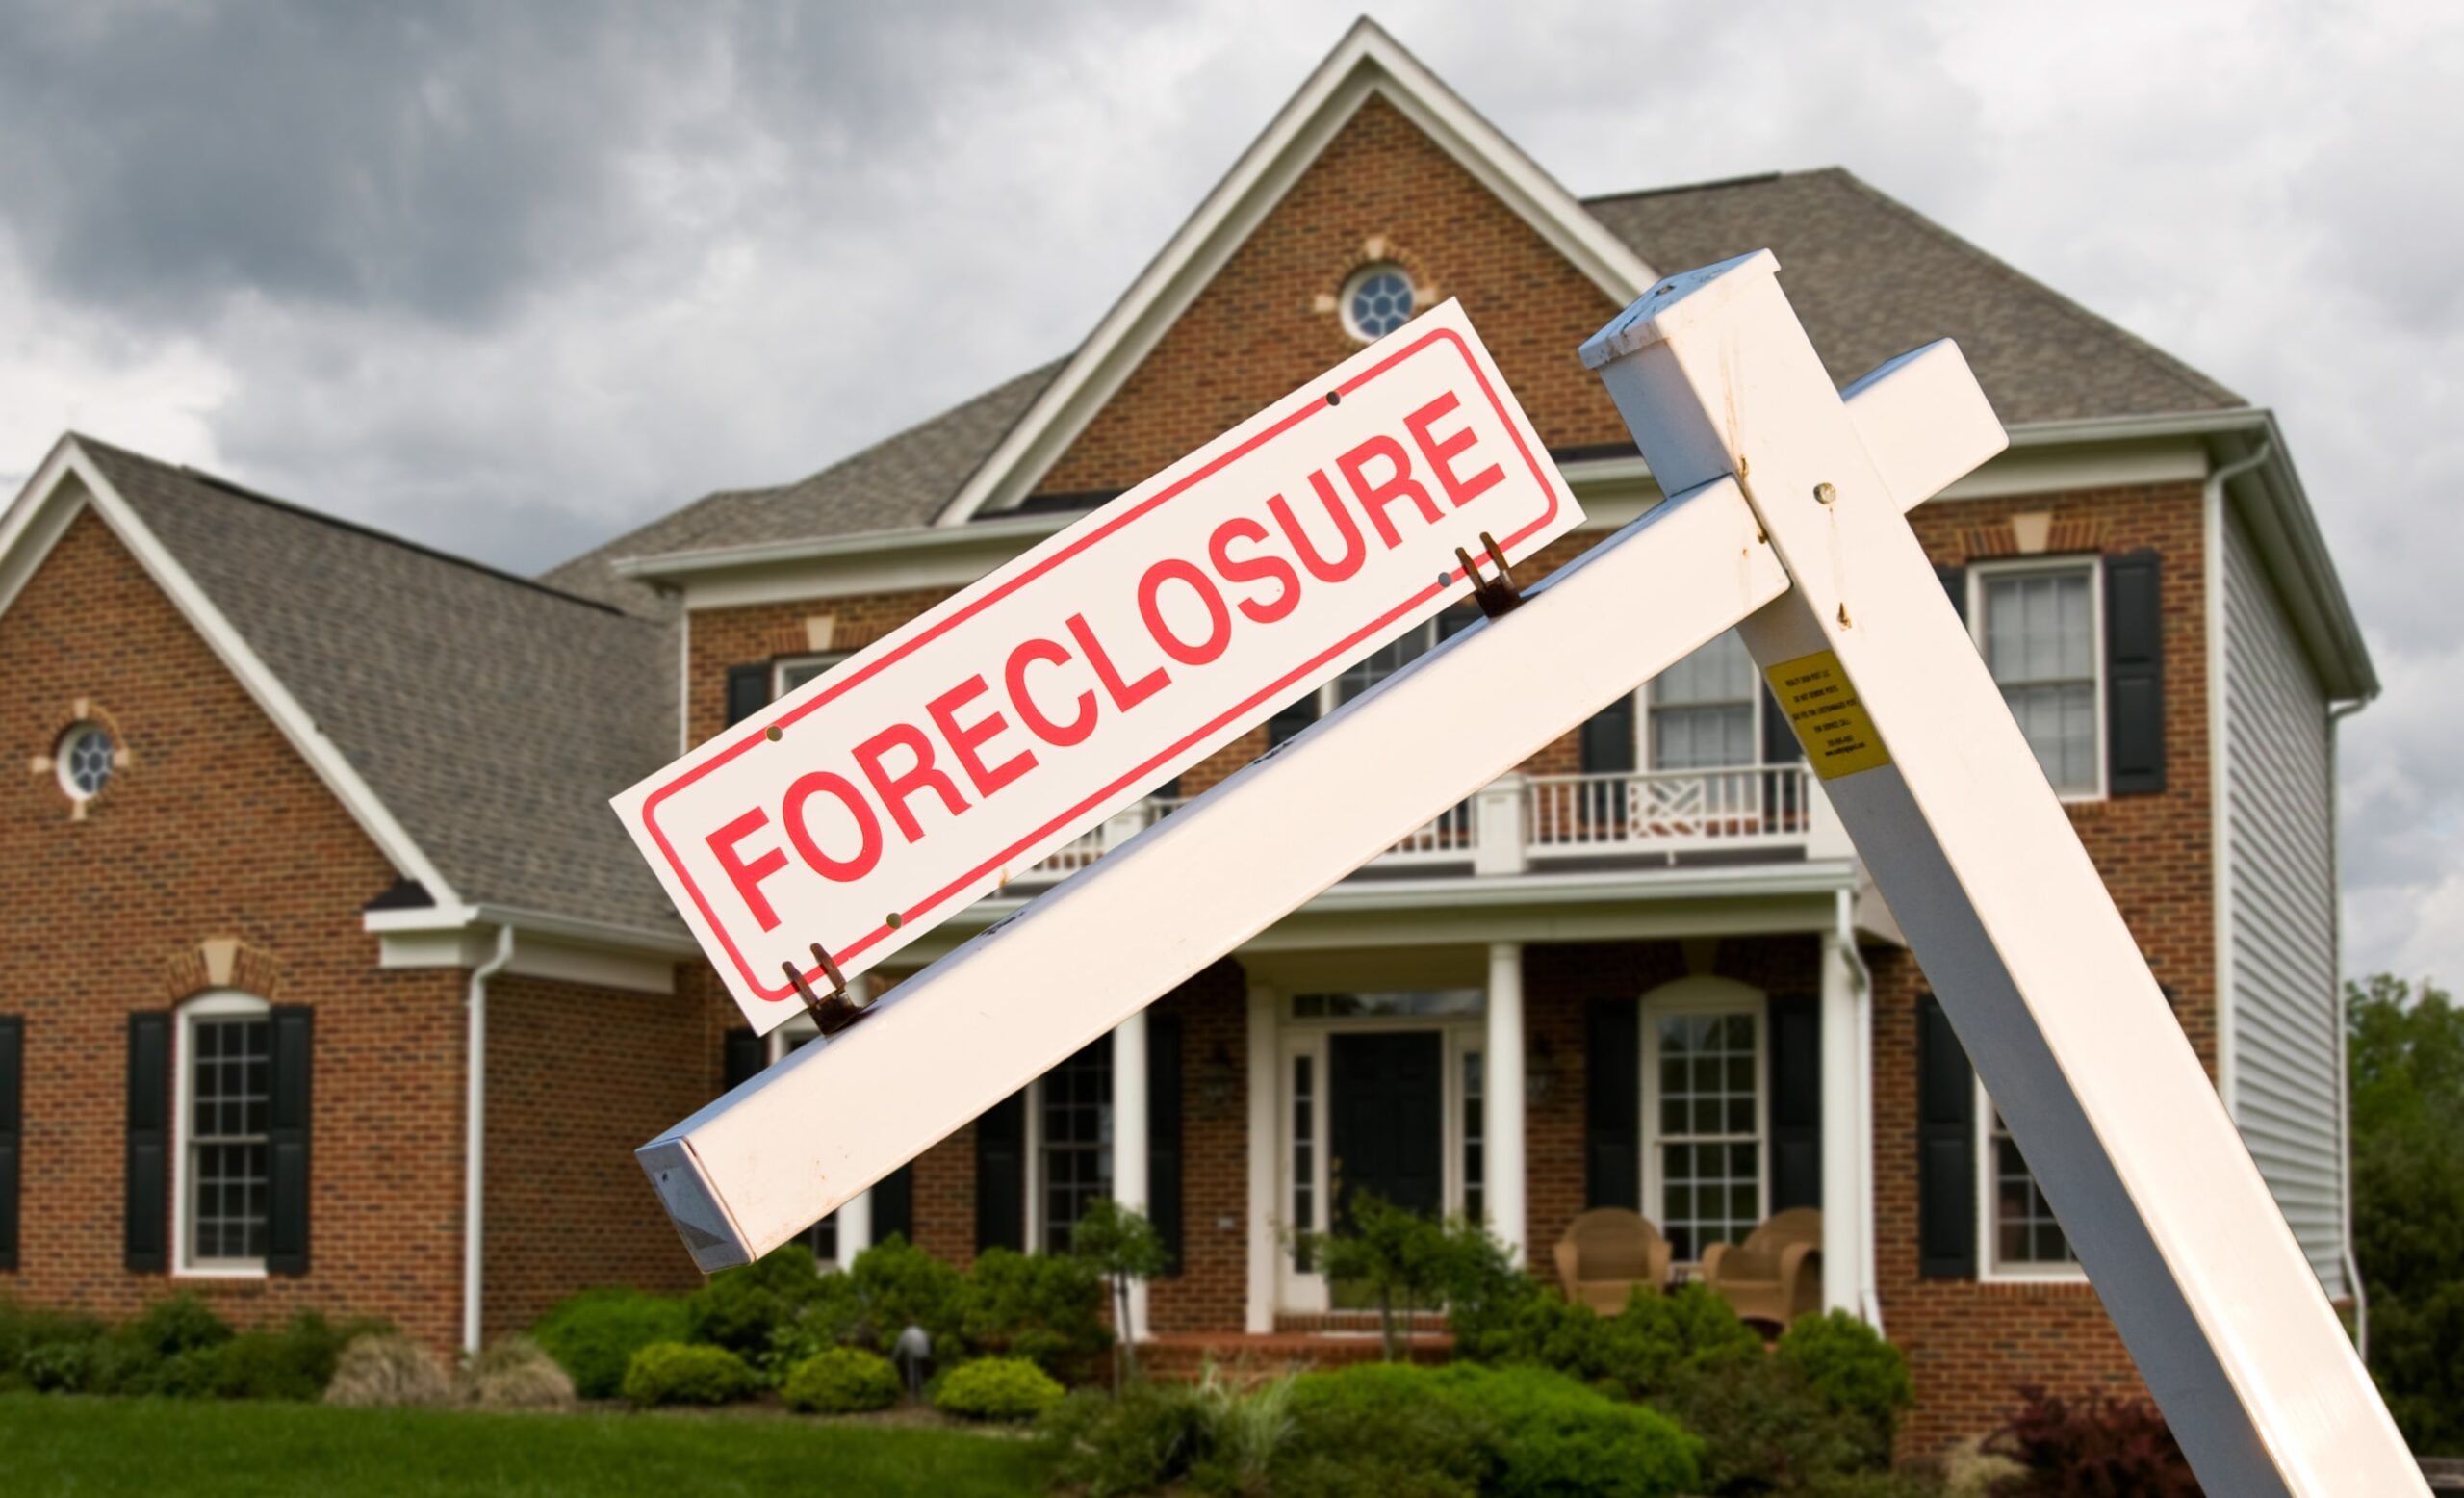 A house being foreclosure due to unpaid property taxes